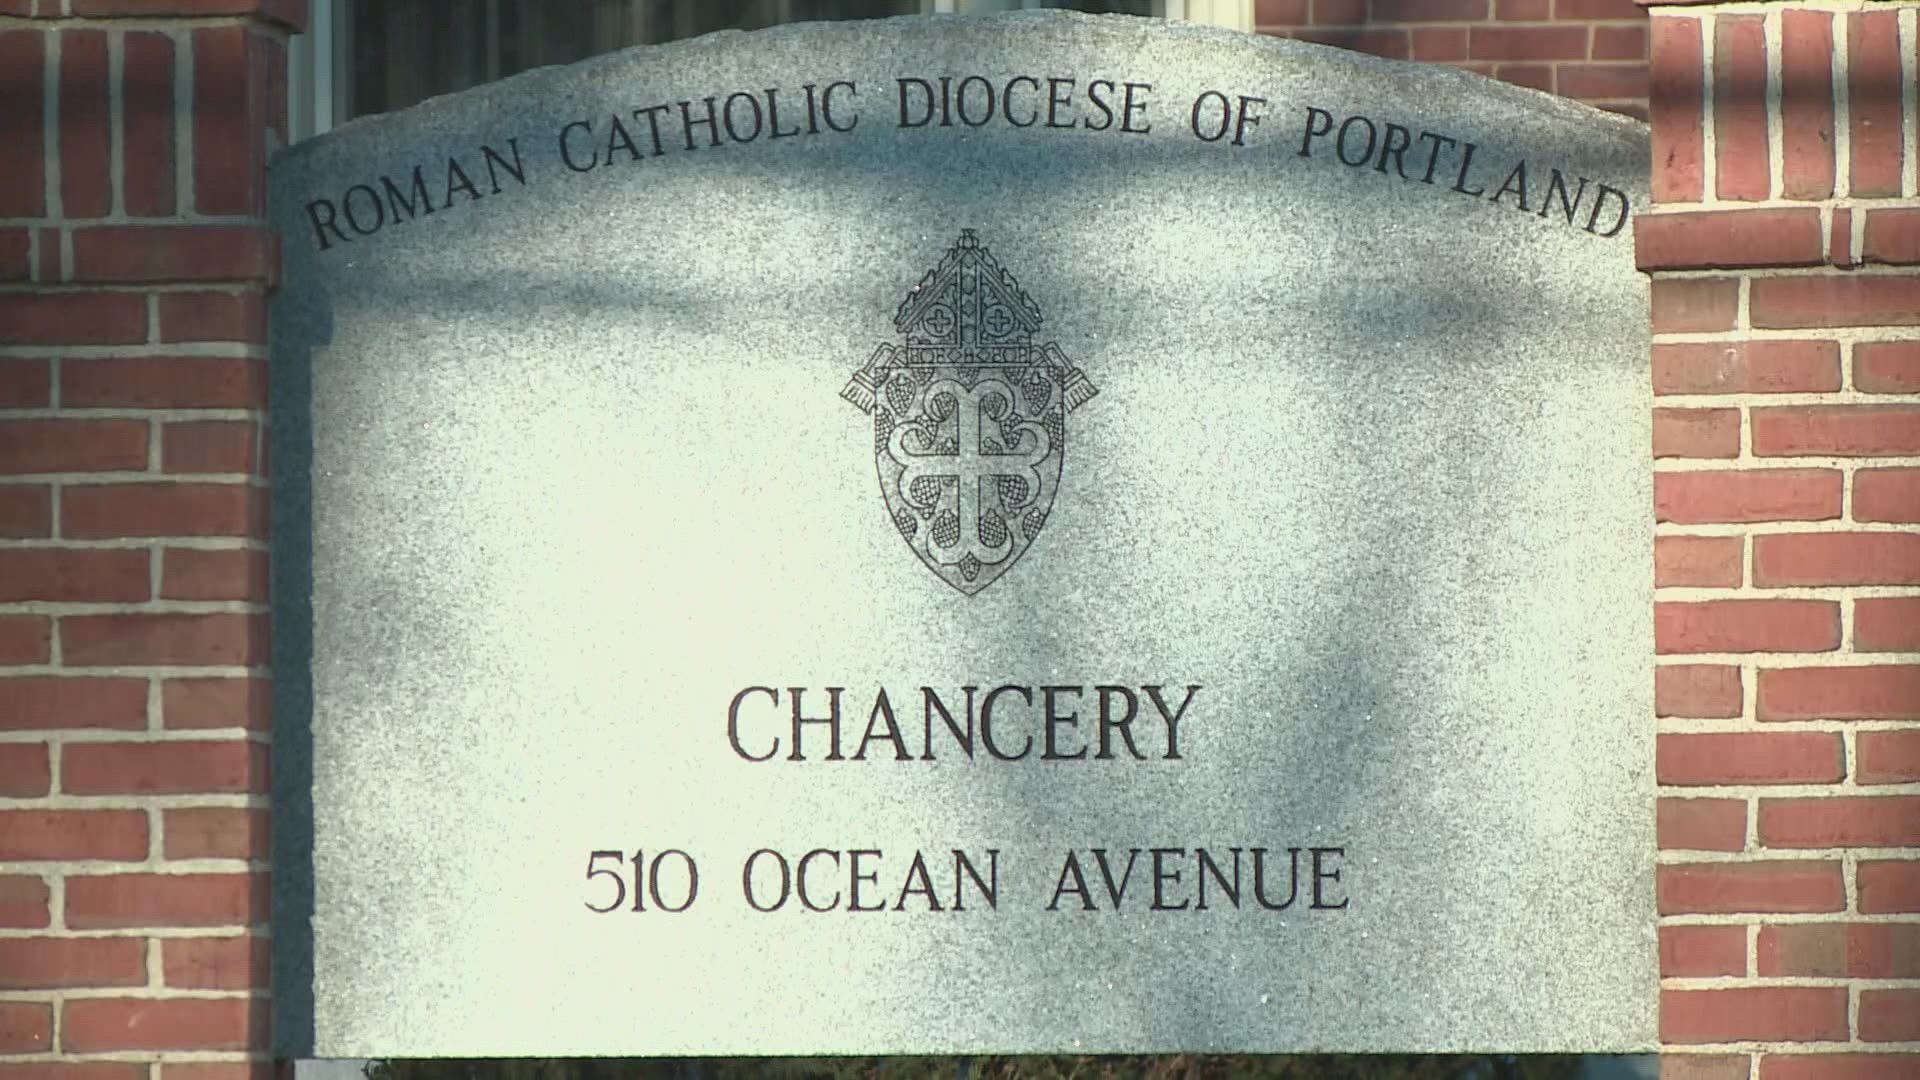 Three lawsuits filed this week allege the Diocese failed to keep children safe from clergy members who were known abusers.